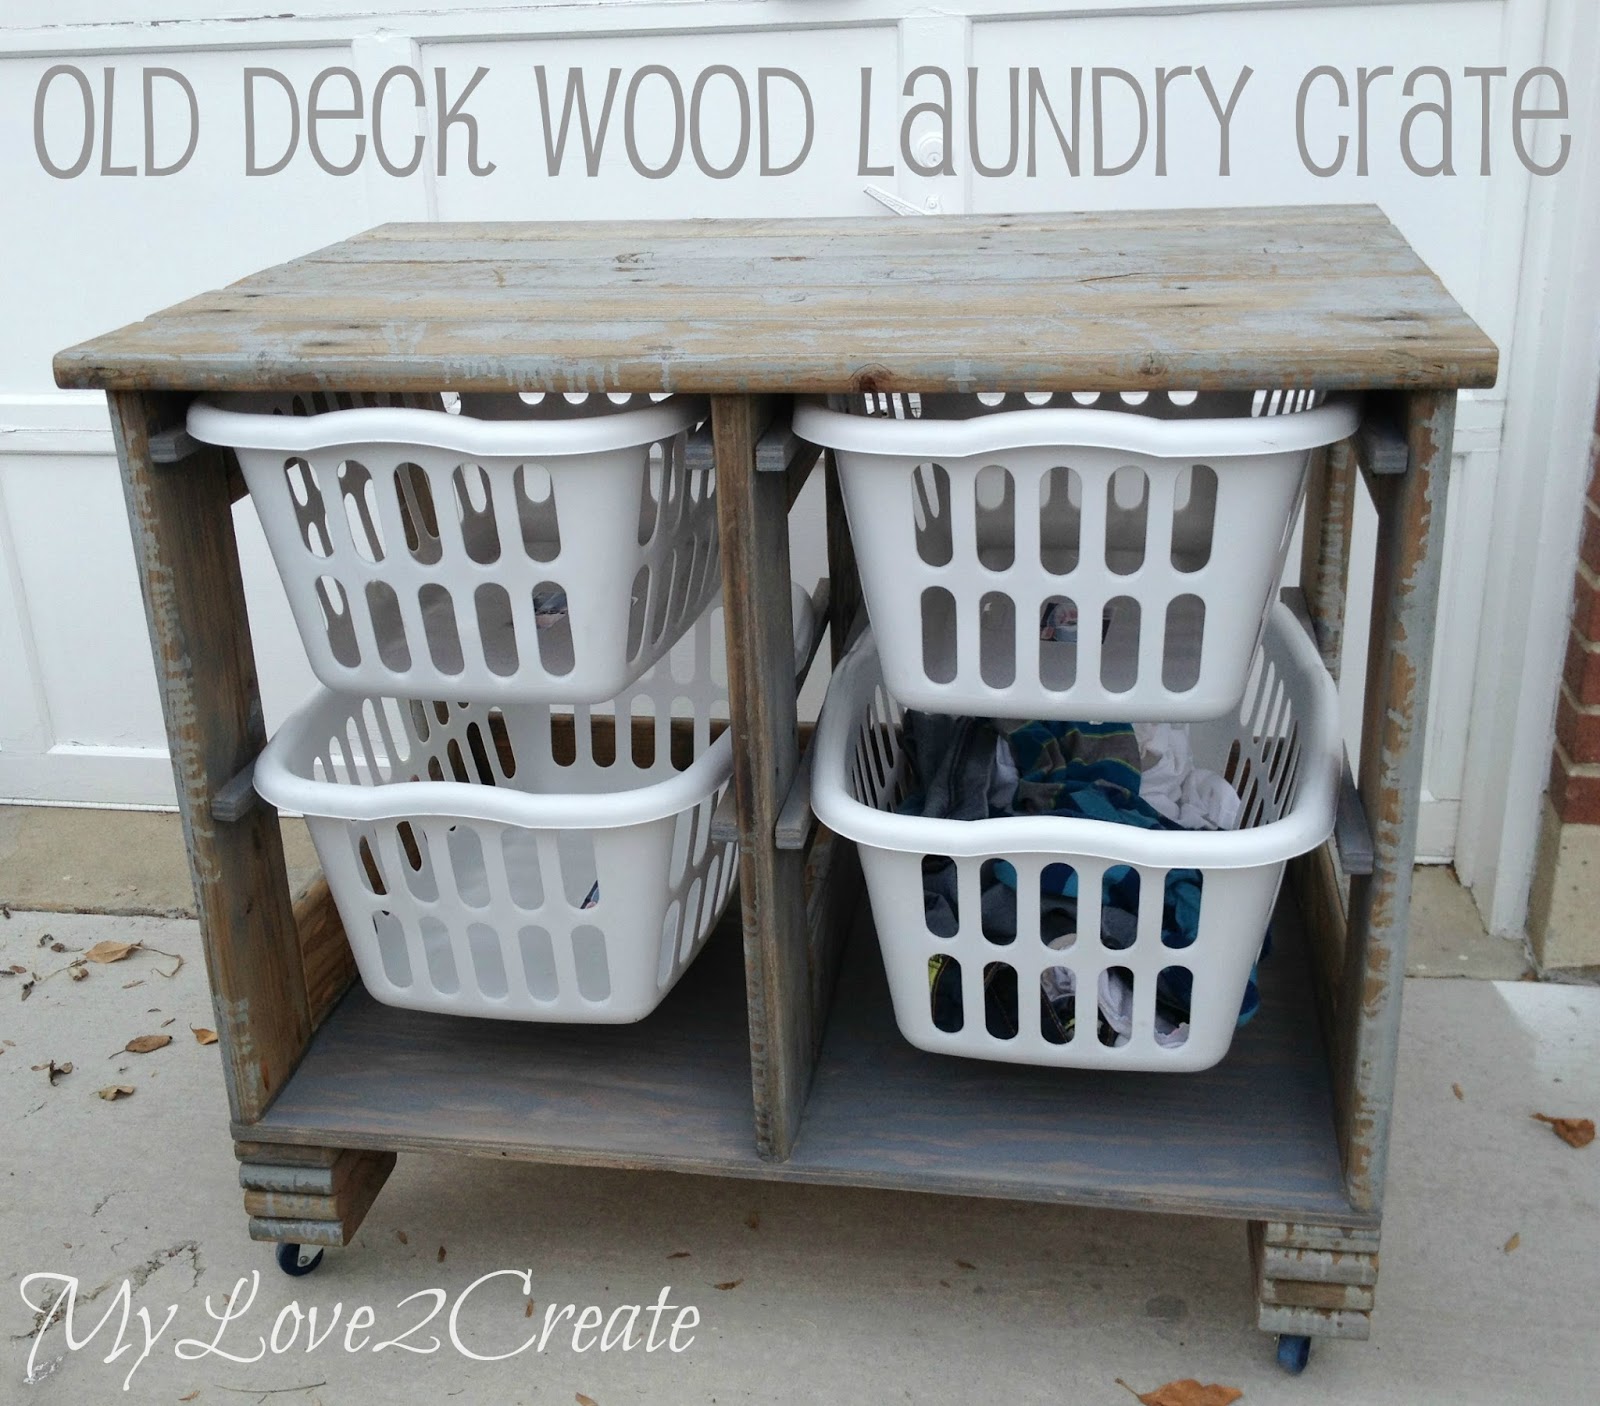 Old Deck Wood Laundry Crate